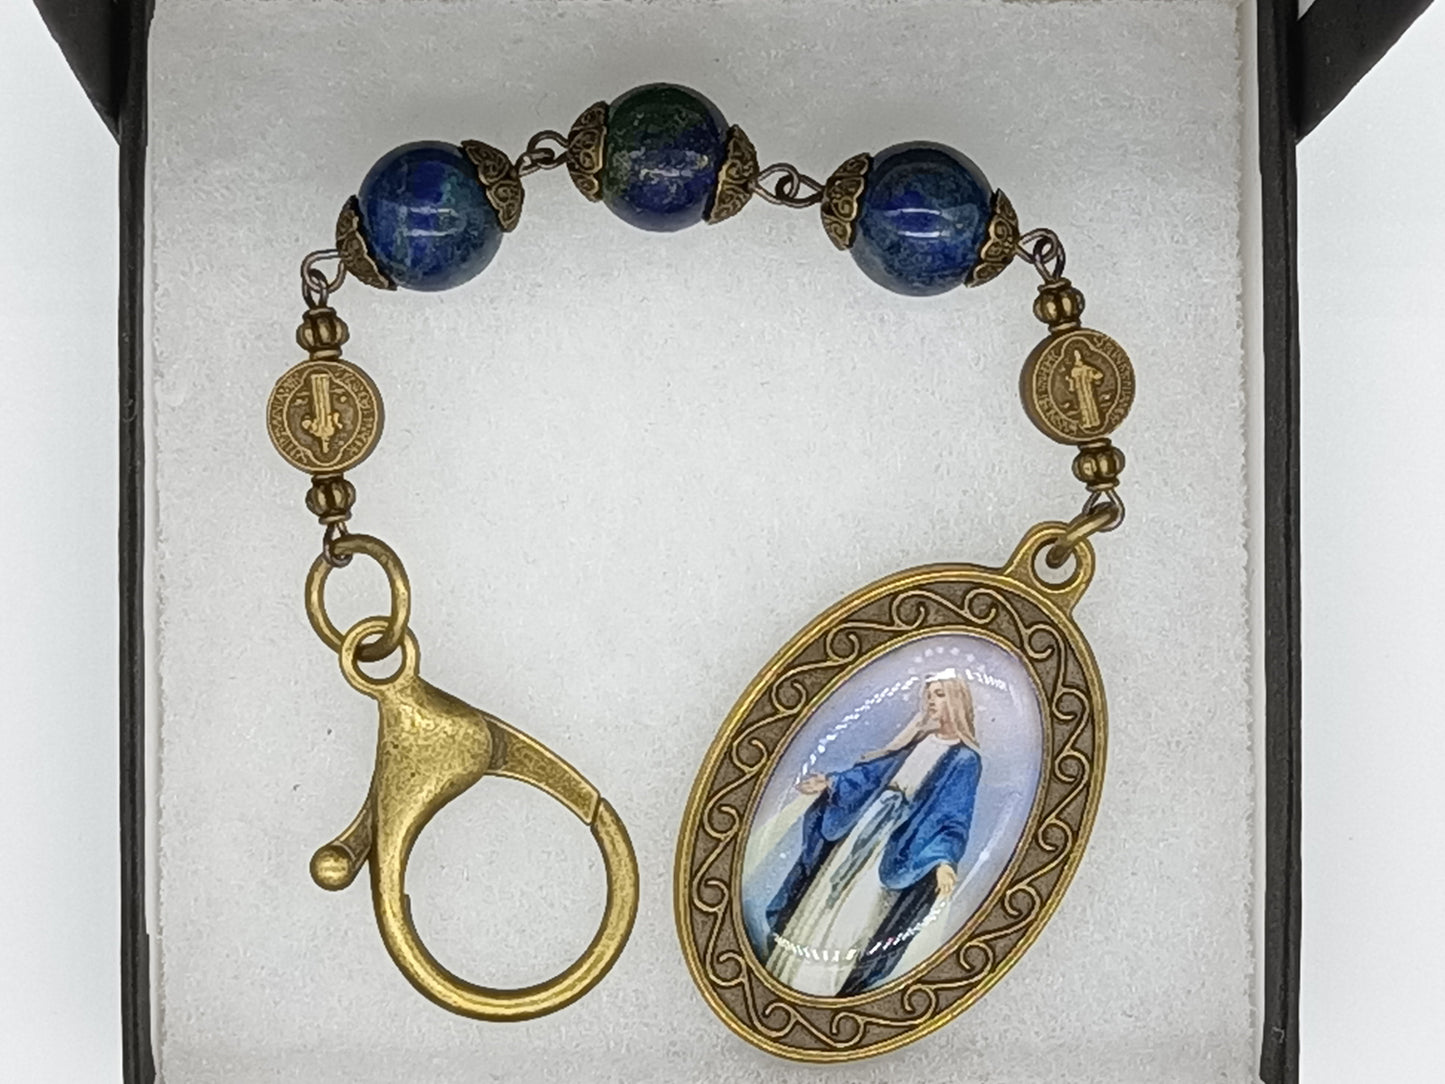 Large Our Lady of Grace 3 Hail Mary devotional prayer beads, Three Hail Mary devotional prayer beads, Car visor rosary, Miraculous medal.